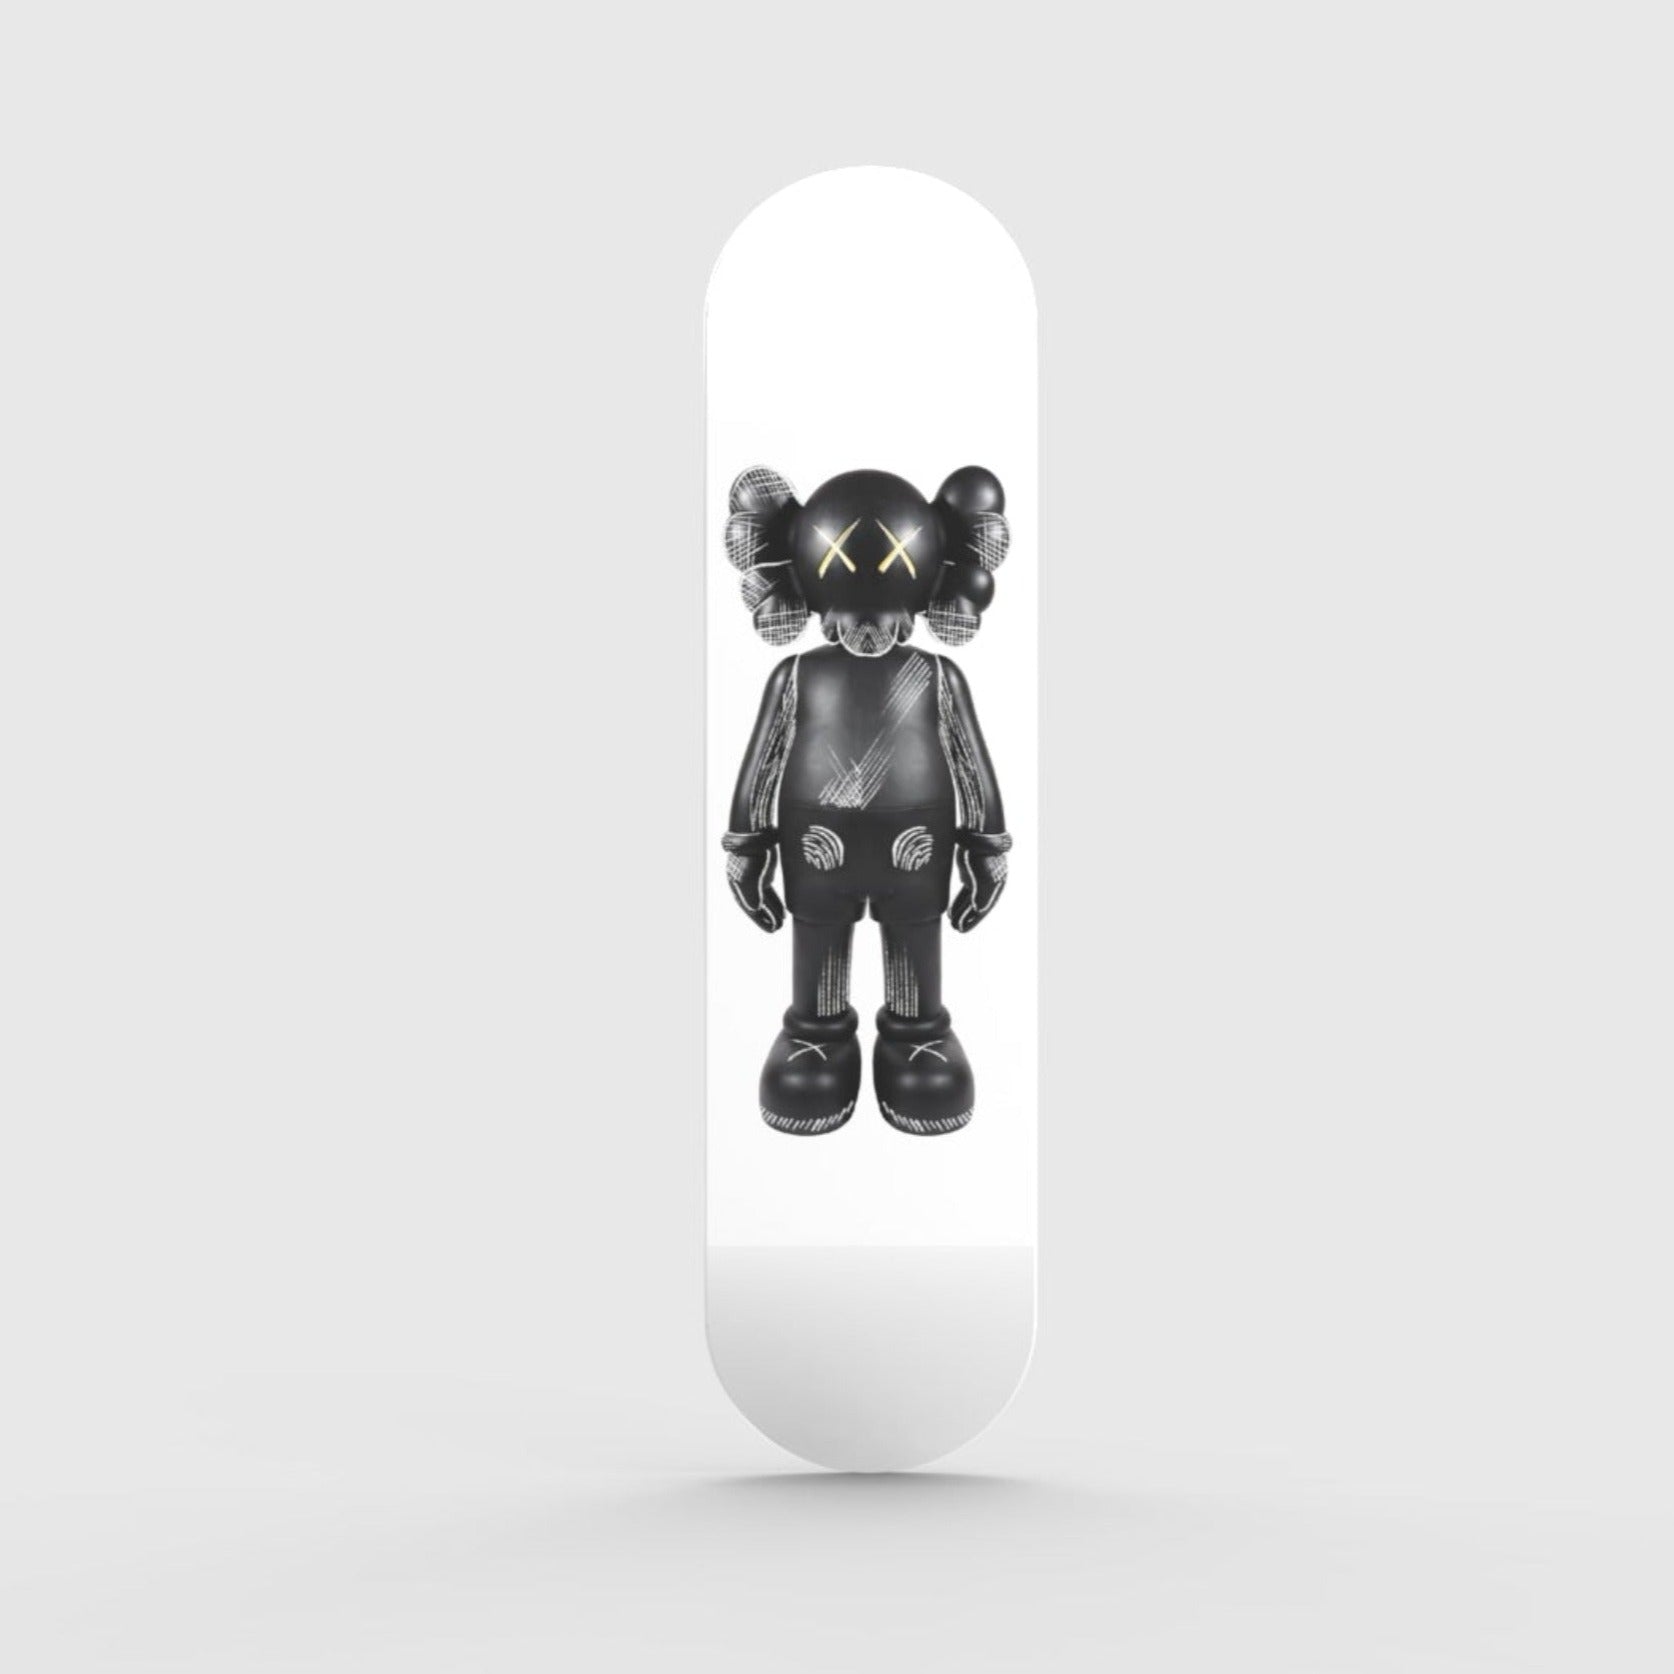 Wall Art of Limited Edition Kaws Skateboard Design in Acrylic Glass - Artist Vibes